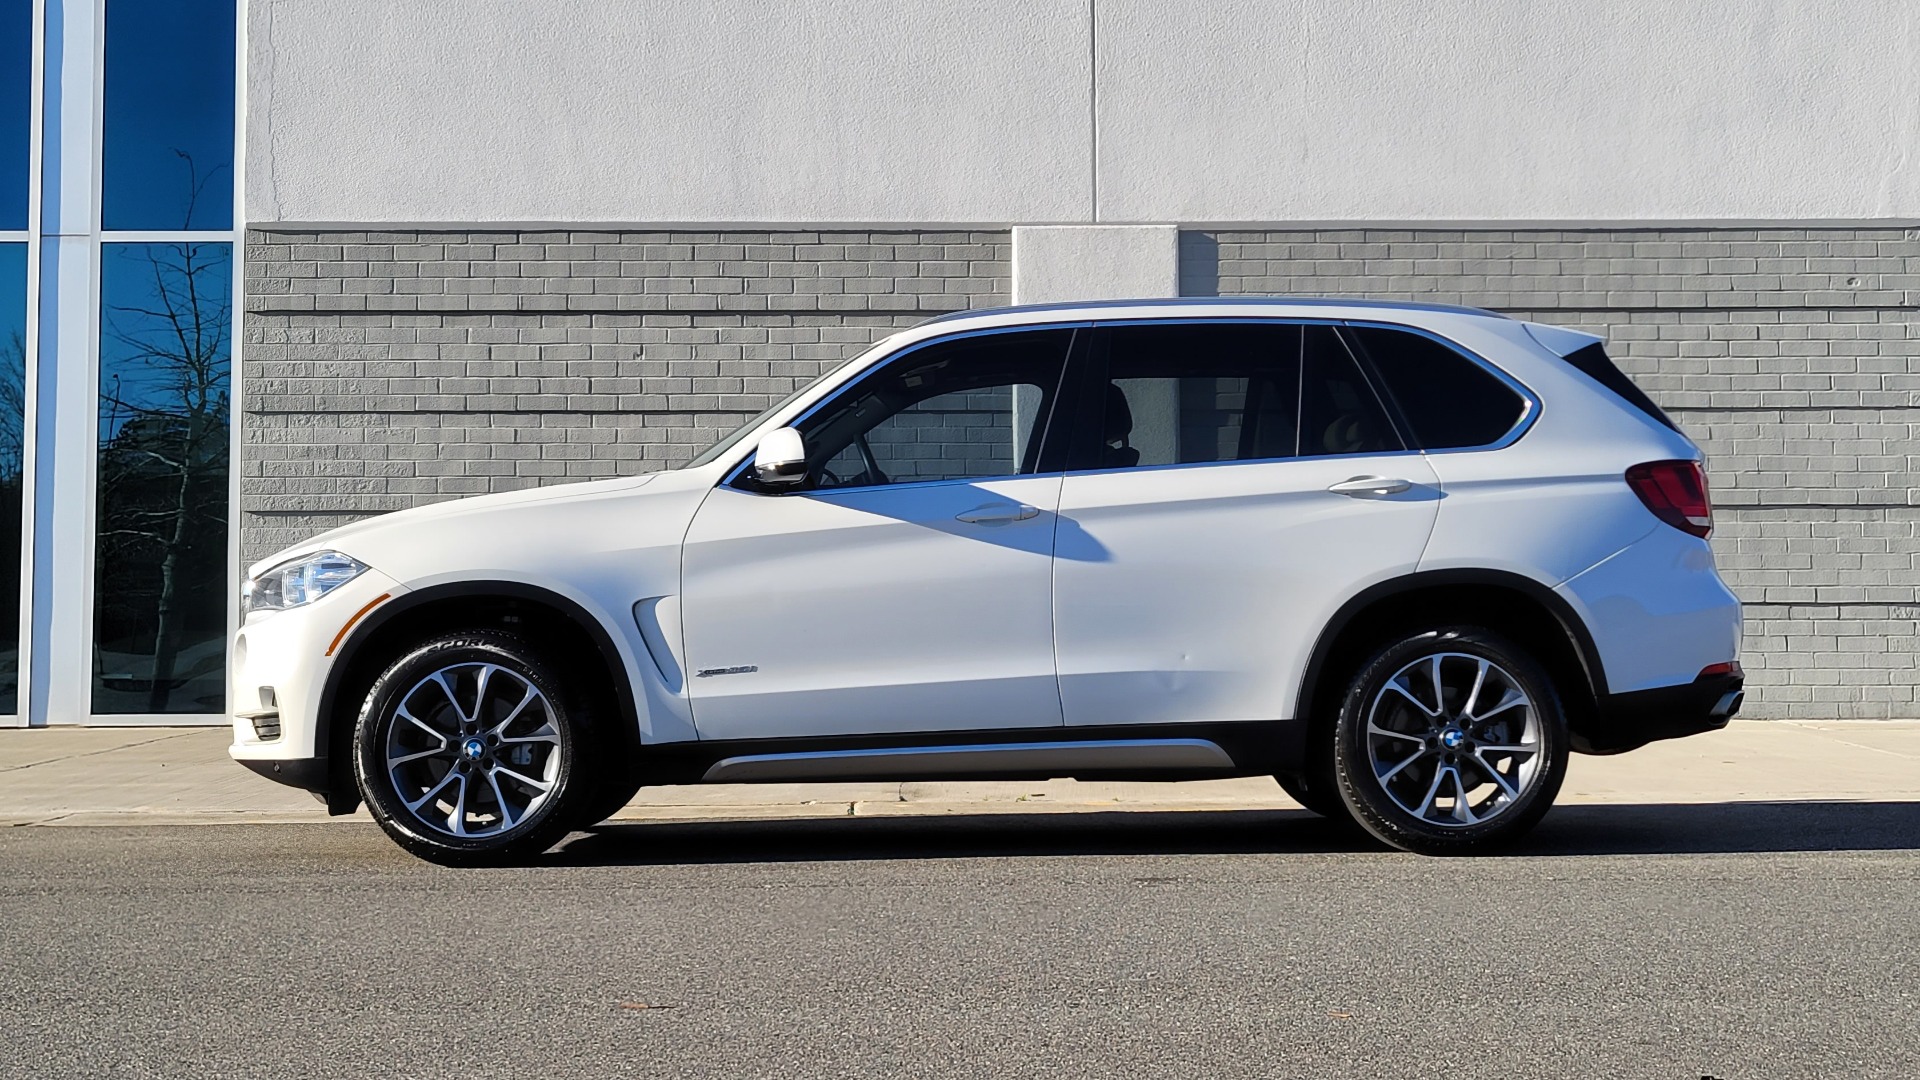 Used 2018 BMW X5 XDRIVE35I PREMIUM / DRVR ASST / HUD / WIRELESS CHARGING / HEATED SEATS for sale $42,995 at Formula Imports in Charlotte NC 28227 4